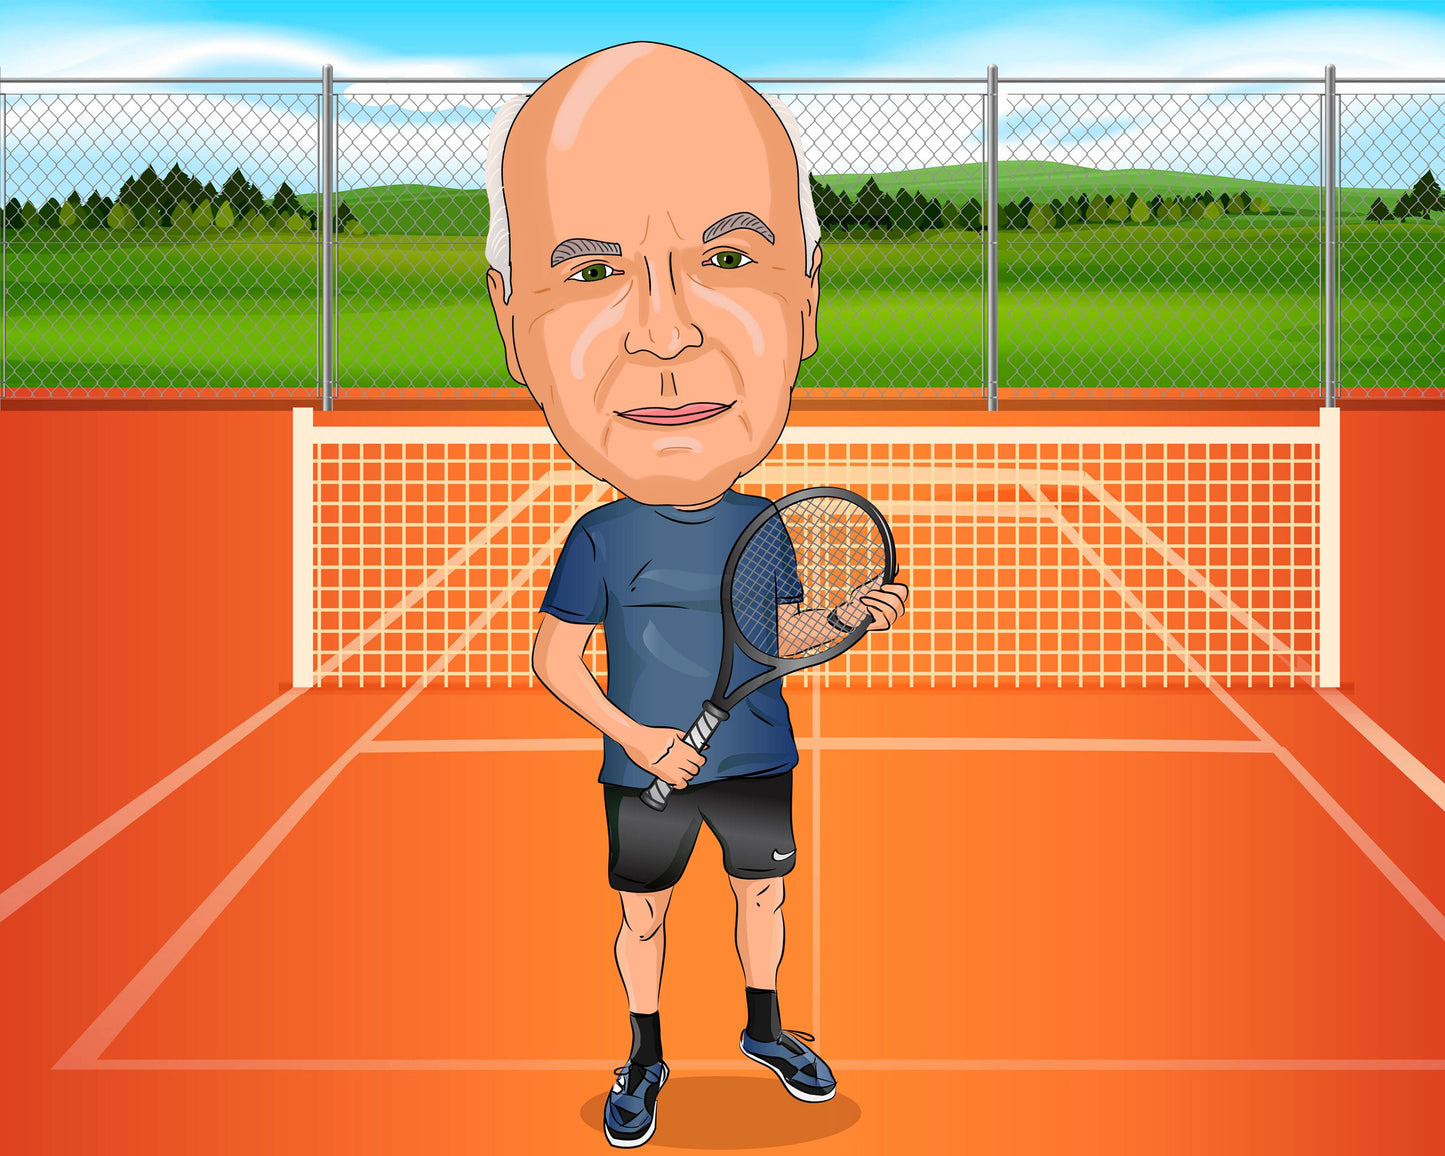 Tennis Player Gift - Custom Caricature Portrait From Your Photo/Tennis Coach Gift